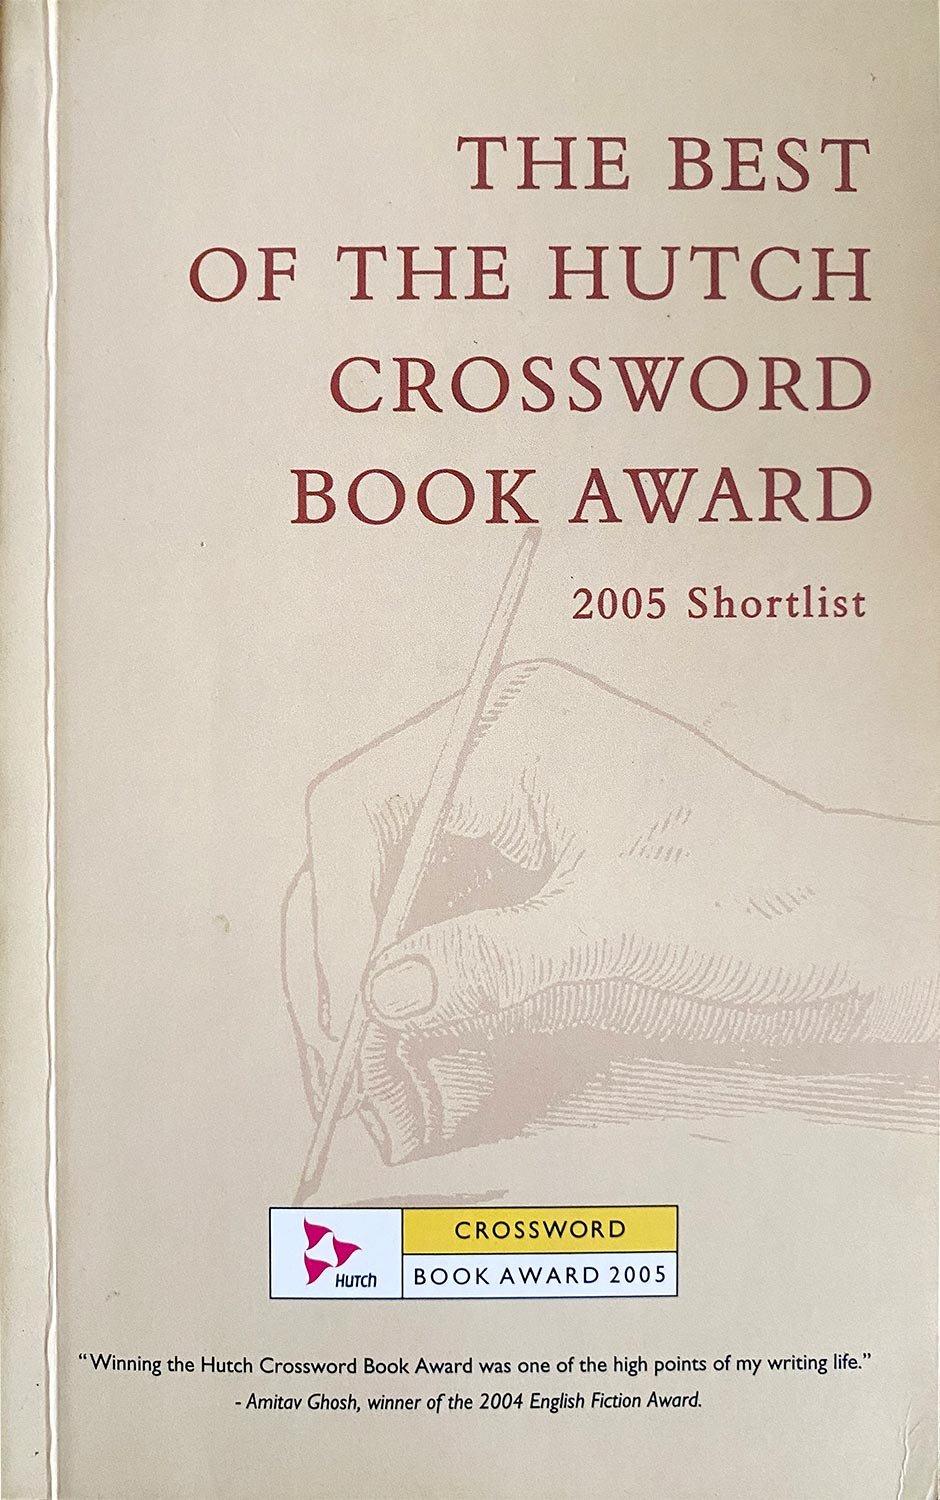 The Best of the Hutch Crossword Book Award